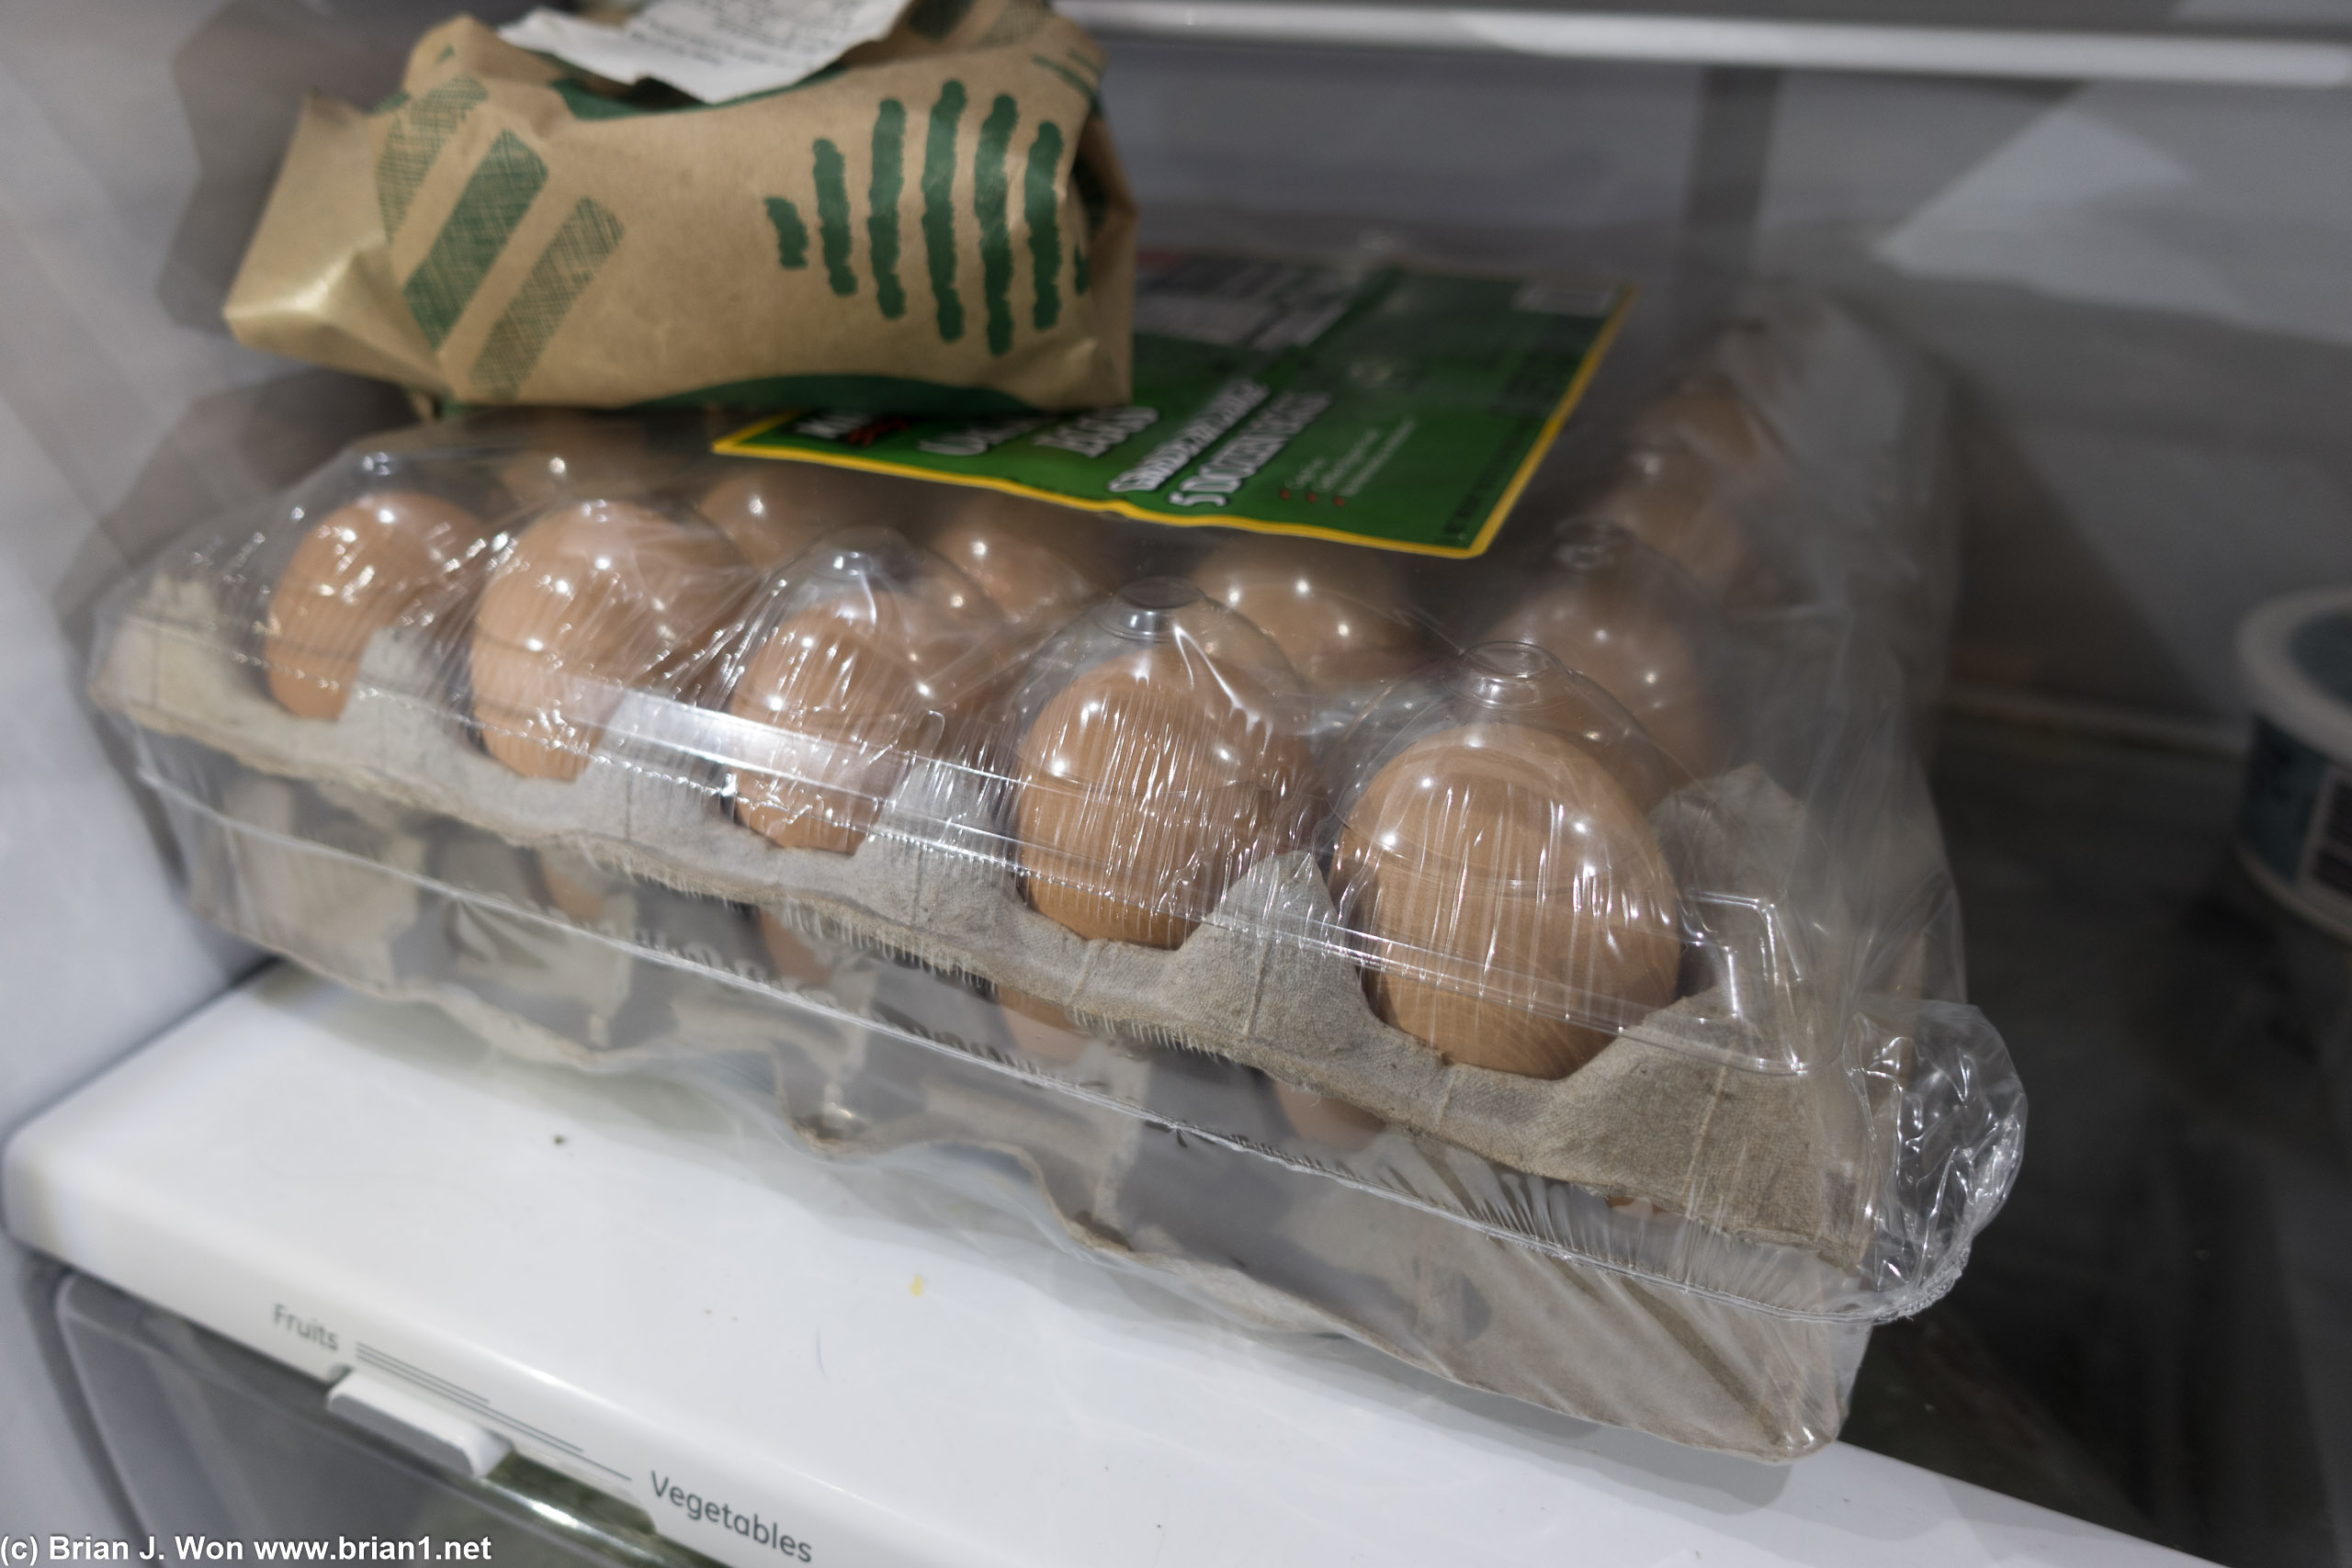 You know your friends are doing okay financially when they can afford more than a dozen eggs.